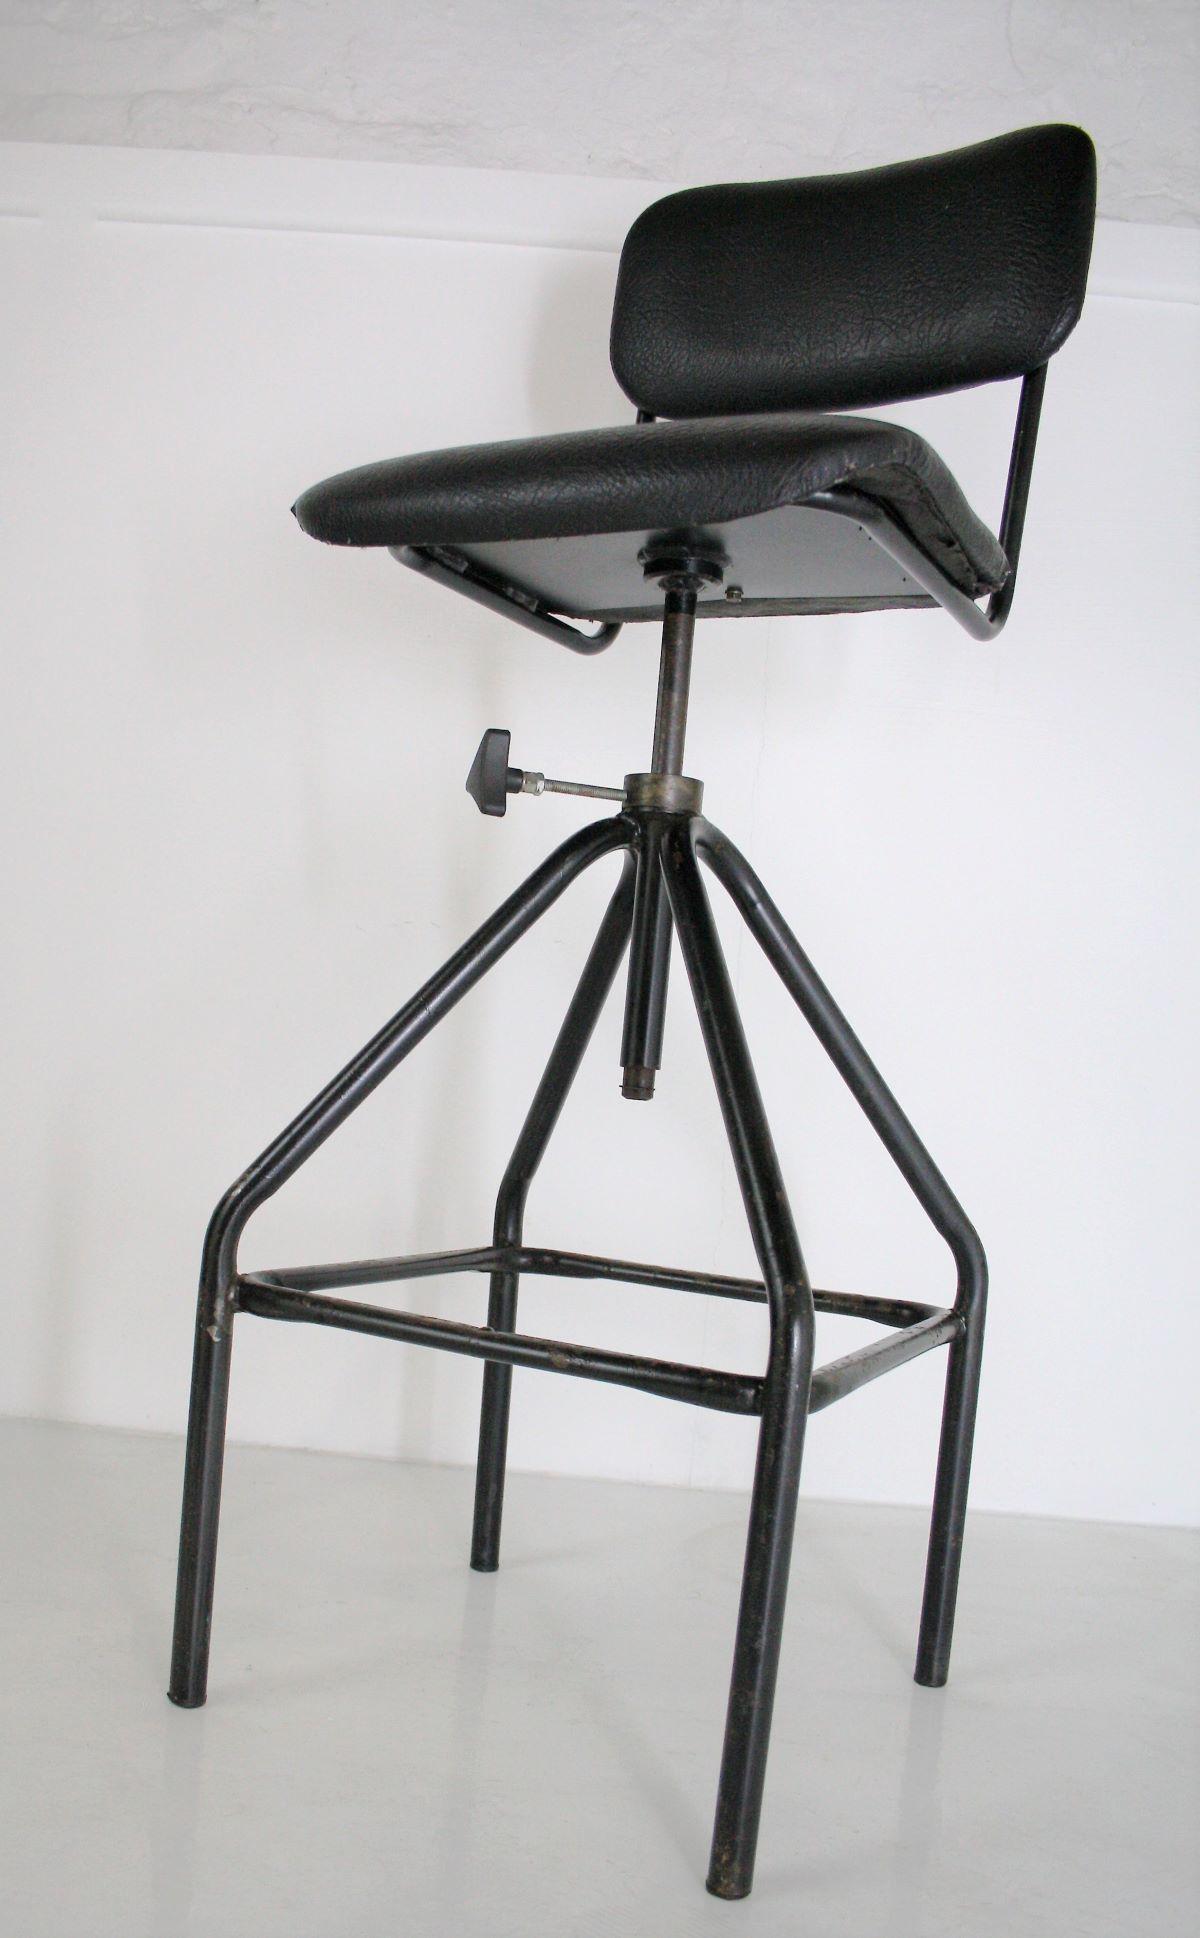 A nice industrial 1970's Swivel Stool, great shape with strong lines.  The black paint is chipped and worn giving it a great look and feel.
The vinyl leather grain effect seat has a few small areas of wear as photographed but is in good sound